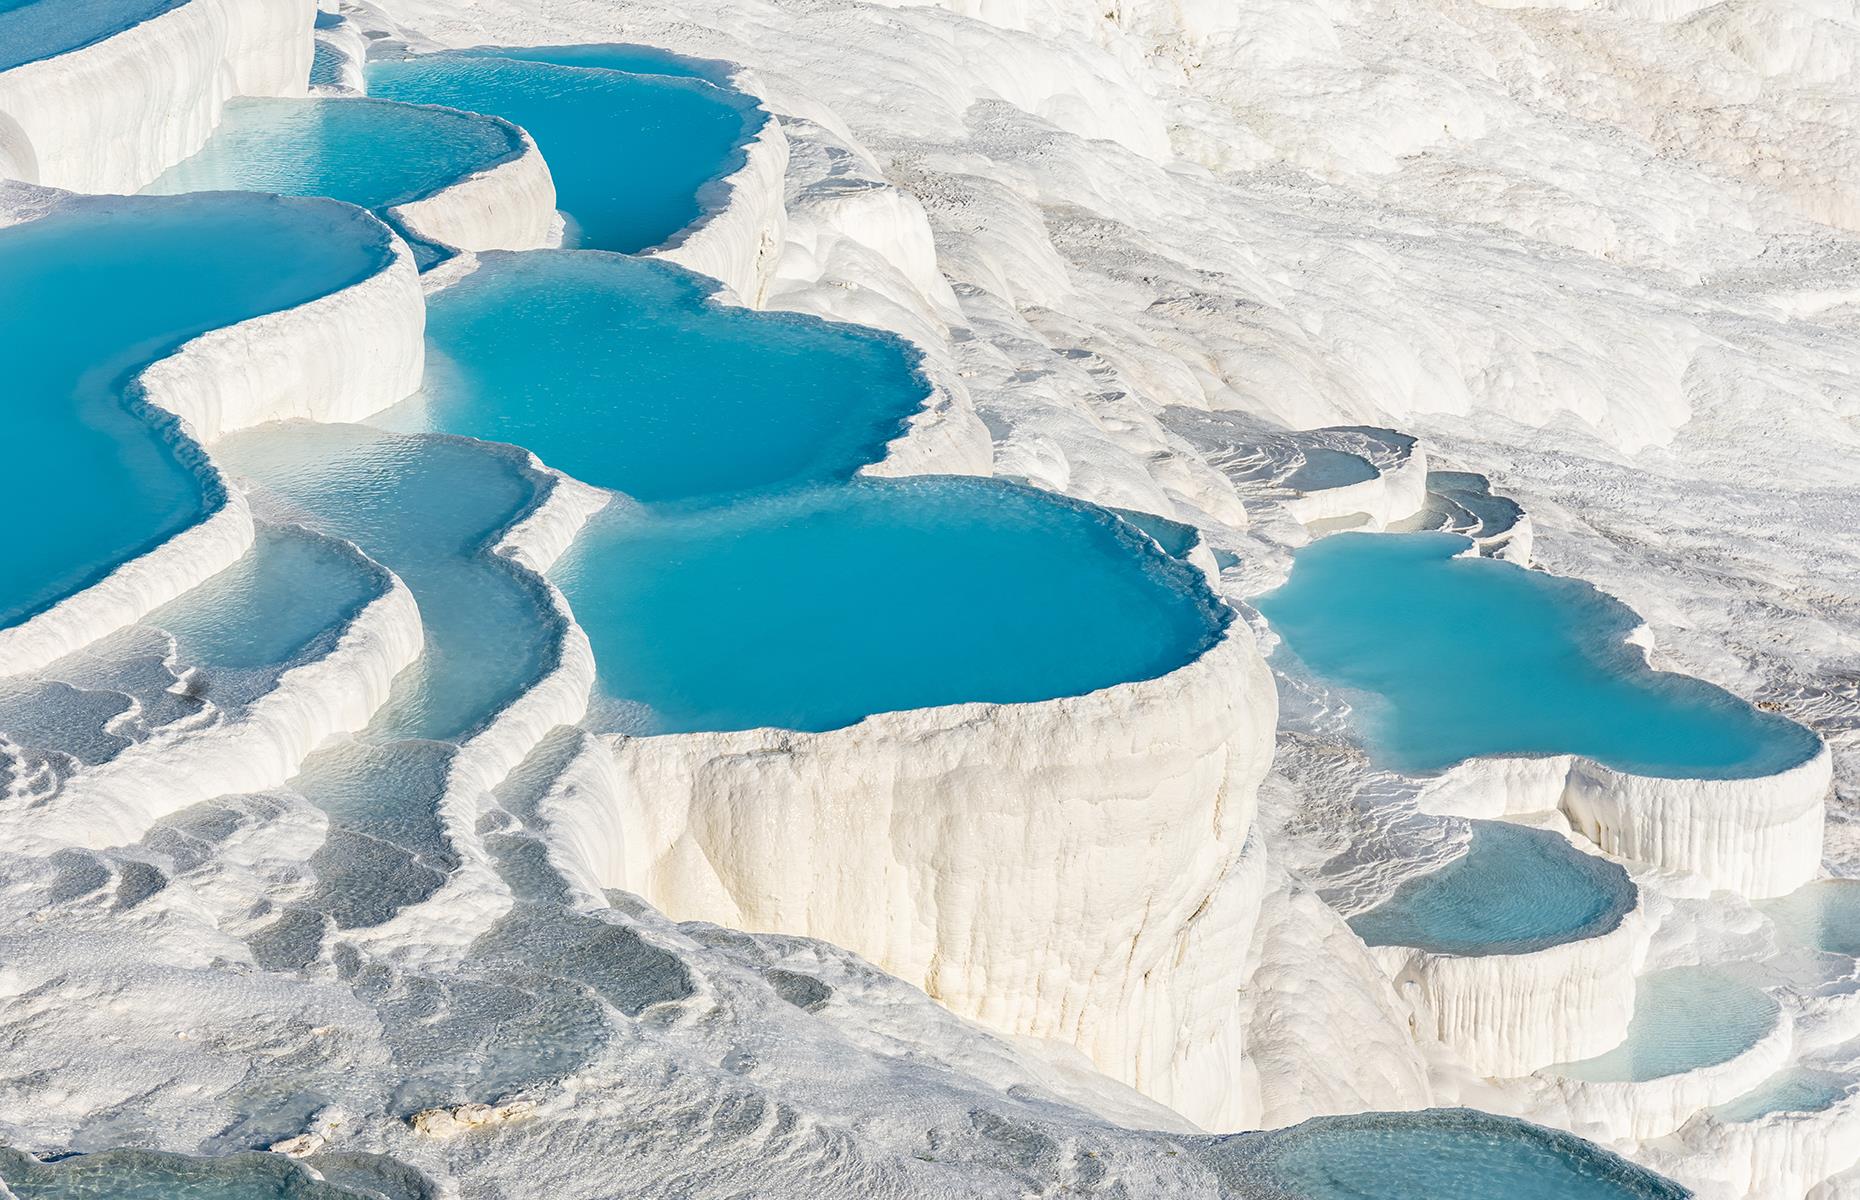 <p>One of Turkey’s most beautiful sights, the surreal travertine terraces of Pamukkale (meaning 'cotton castle') are a geological phenomenon. The striking pools are a result of the mineral-rich hot springs that bubble away beneath the ground. Here are more of <a href="https://www.loveexploring.com/galleries/92672/the-worlds-most-beautiful-natural-wonders?page=1">the world's most beautiful natural wonders</a>.</p>